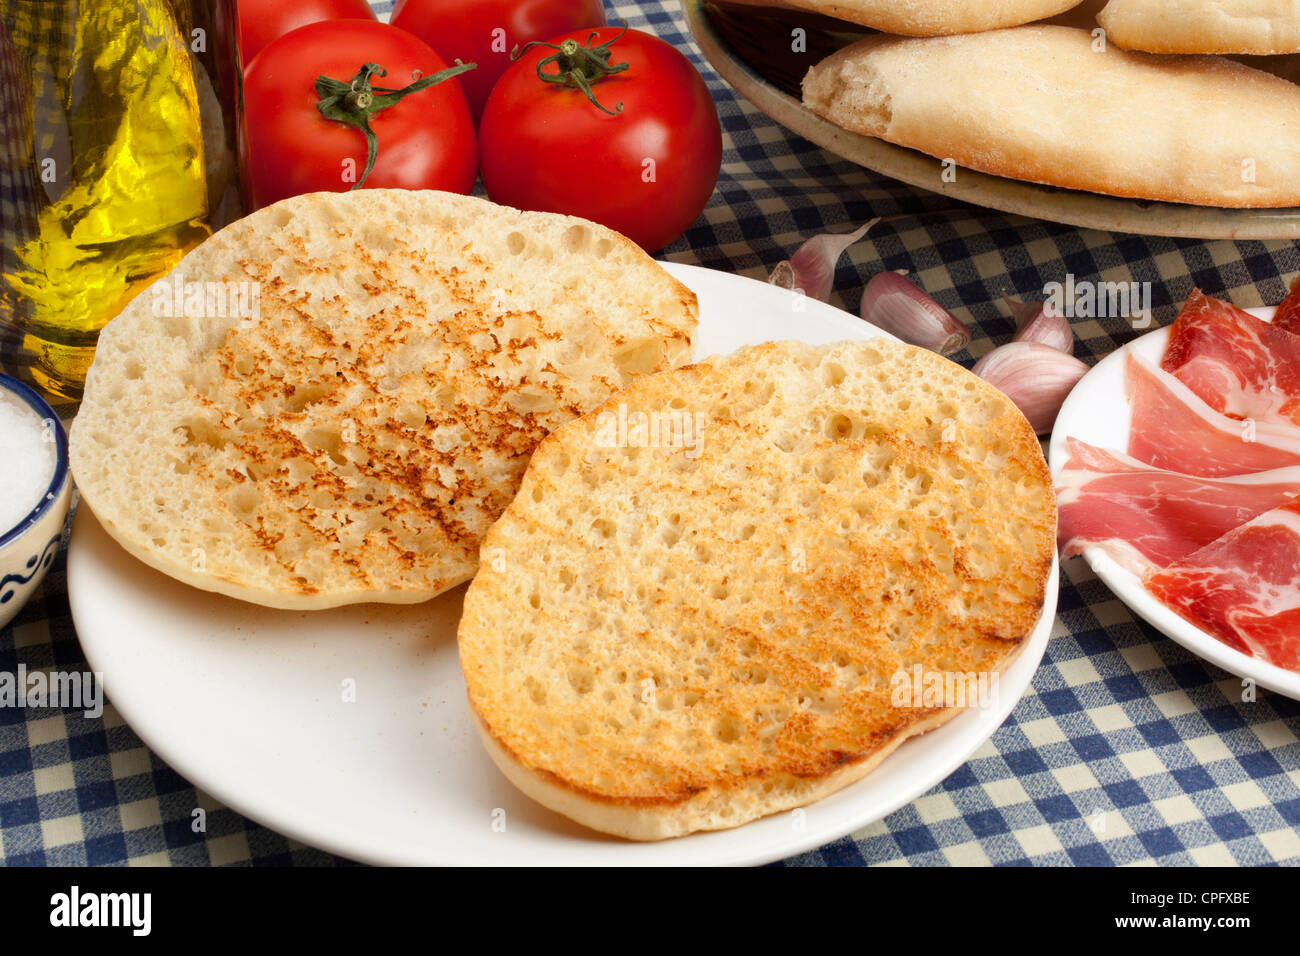 Typical breakfast mollete with ham tomato and oil Antequera Malaga Andalusia Spain Stock Photo